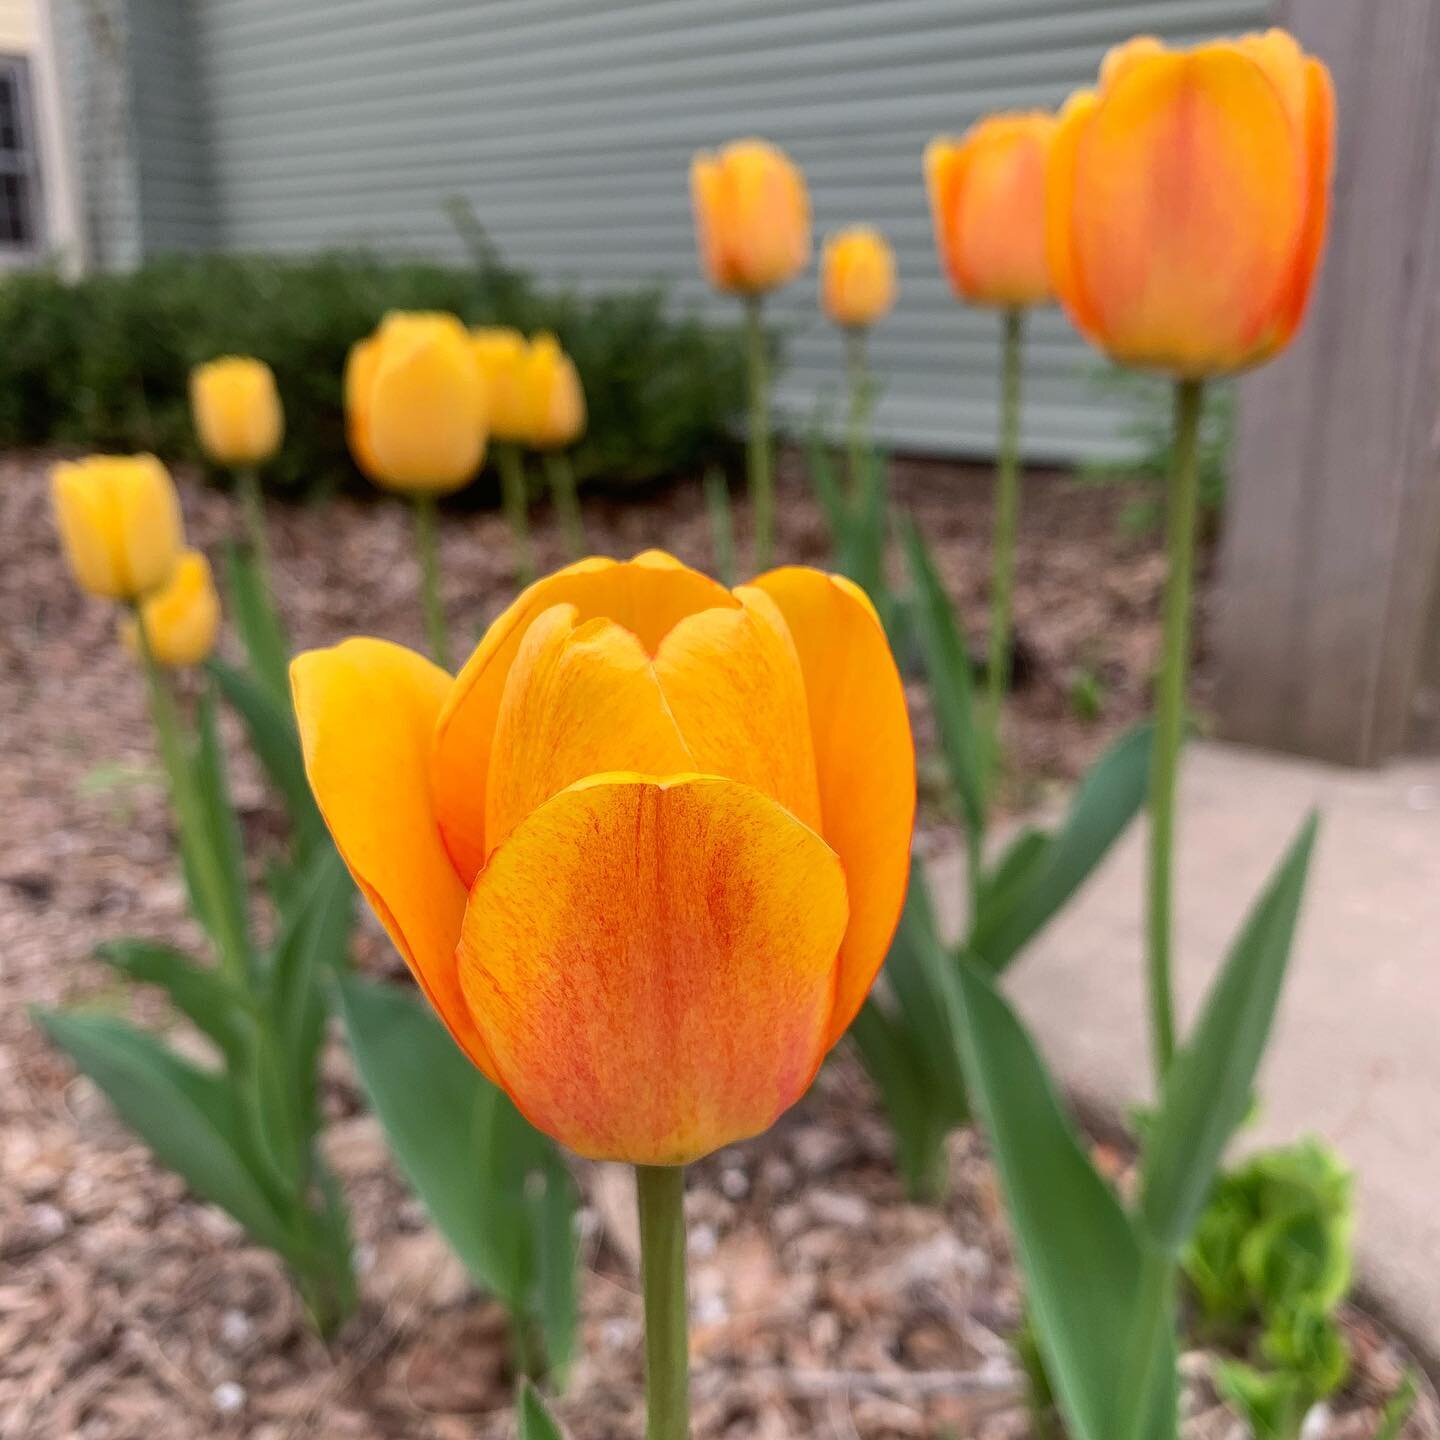 These were supposed to be orange. I grant you that they&rsquo;ve oranged up a bit. 🤔 @verynicemel what do you think? They aren&rsquo;t as orange as yours are they?